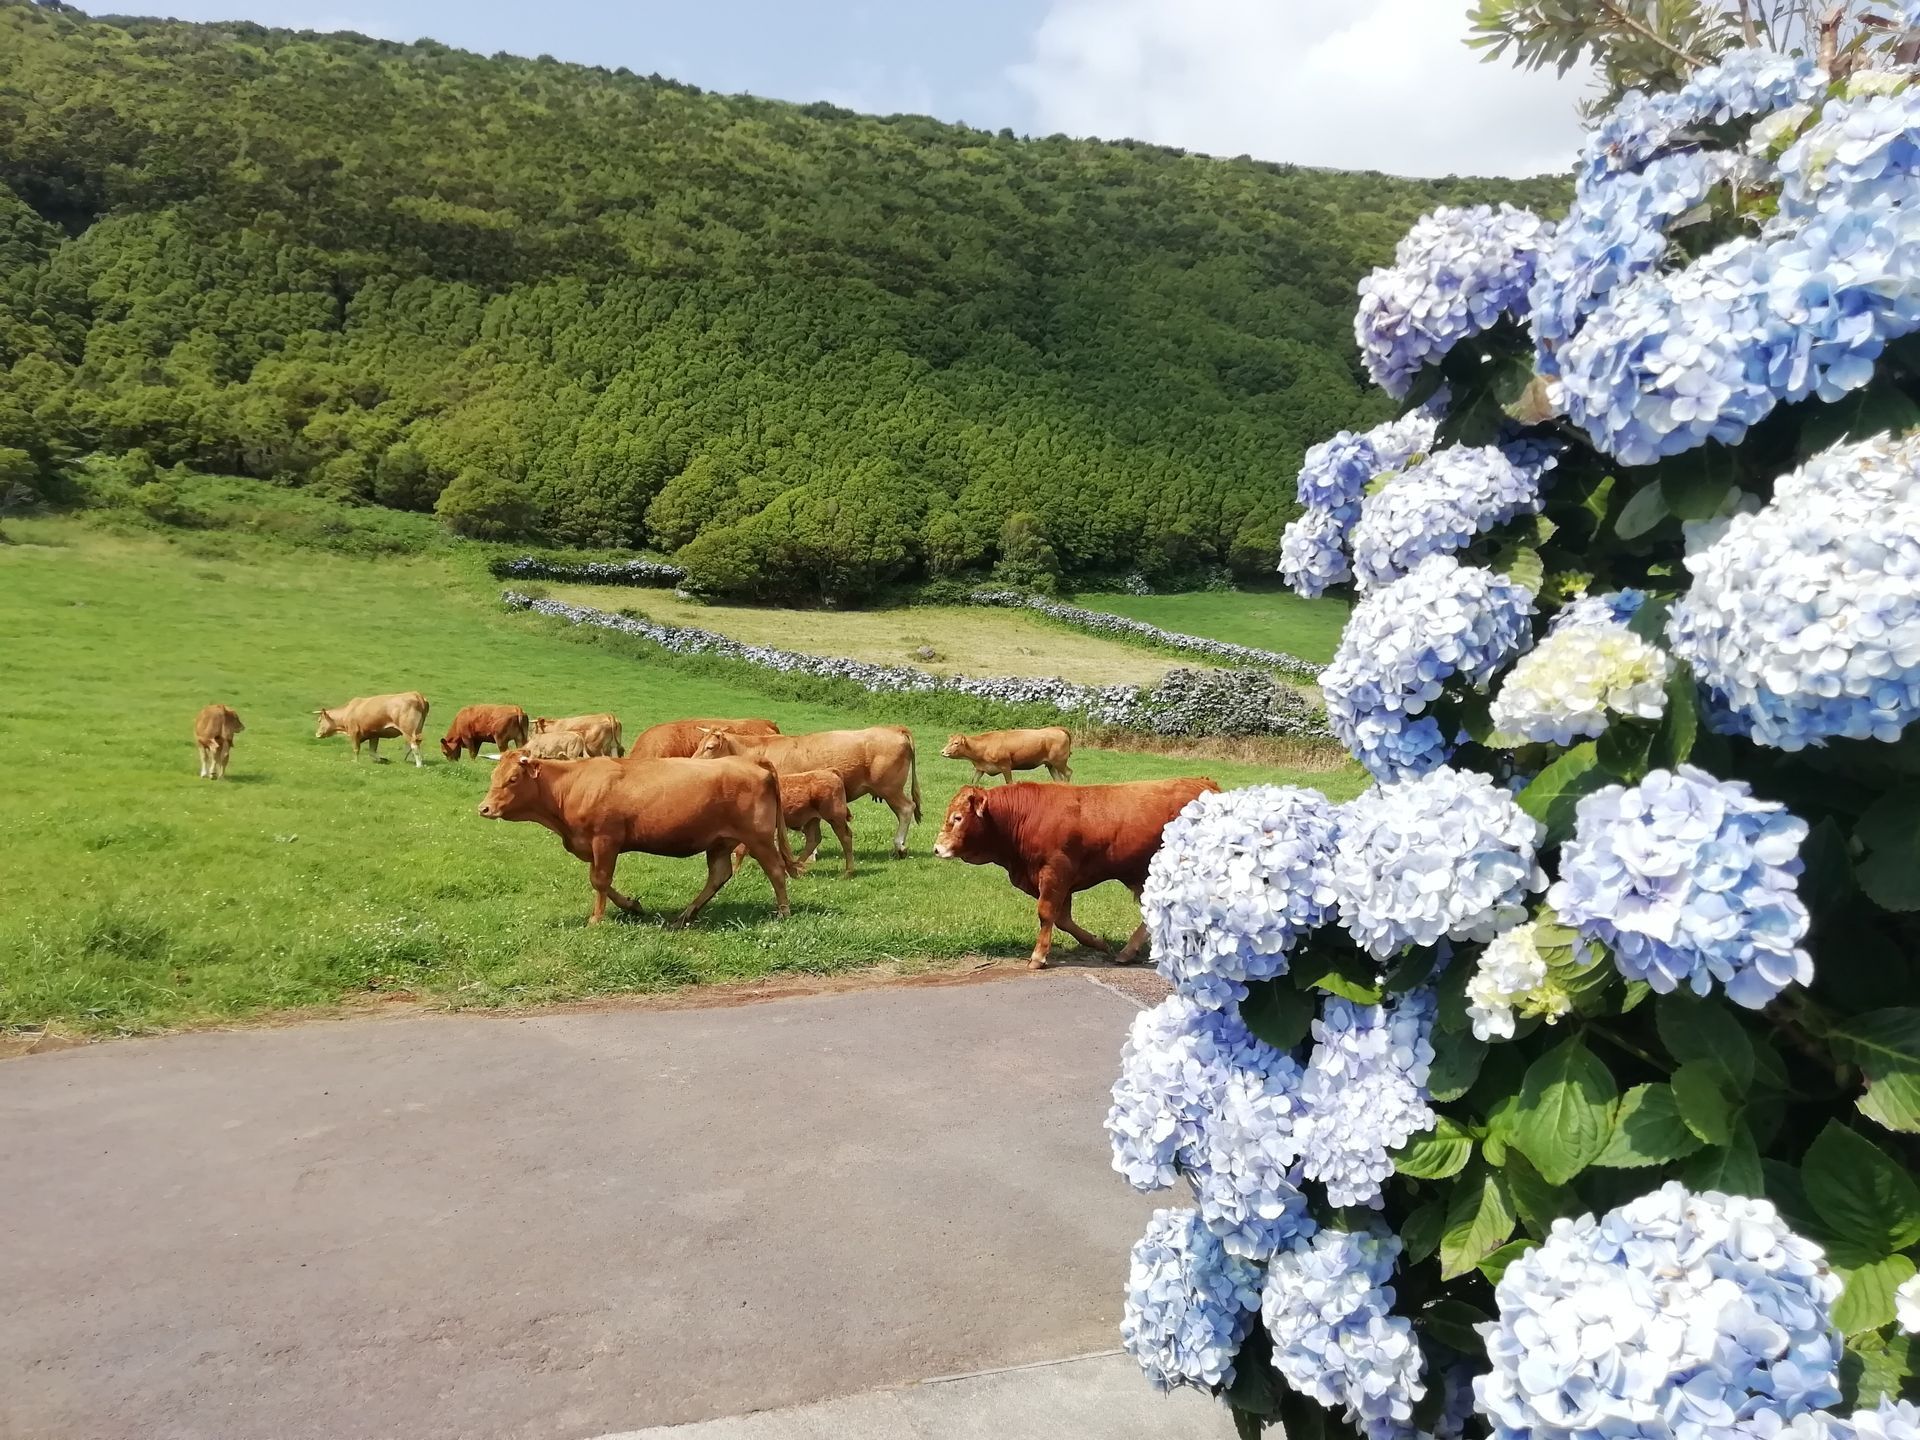 Immerse yourself in nature on our full-day Excursions, Tours and Guided Visits on the island of Faial Azores.